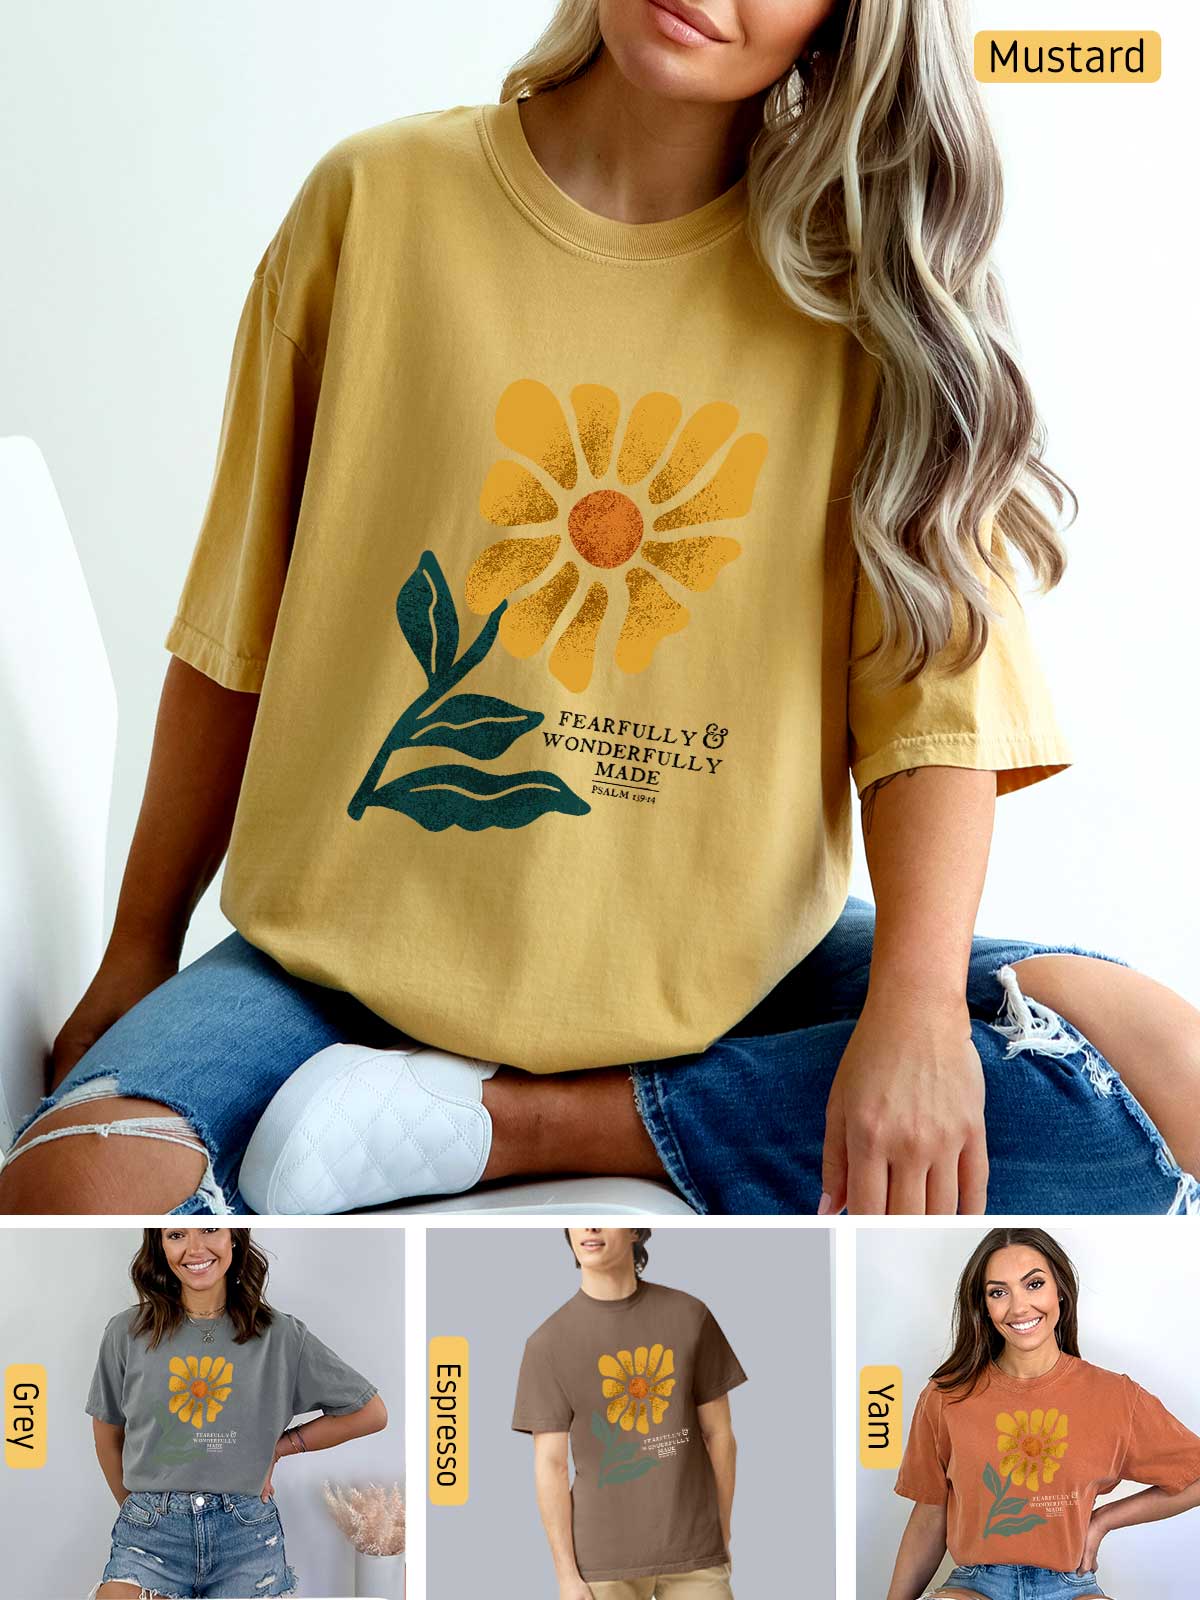 a woman wearing a mustard colored shirt with a flower on it